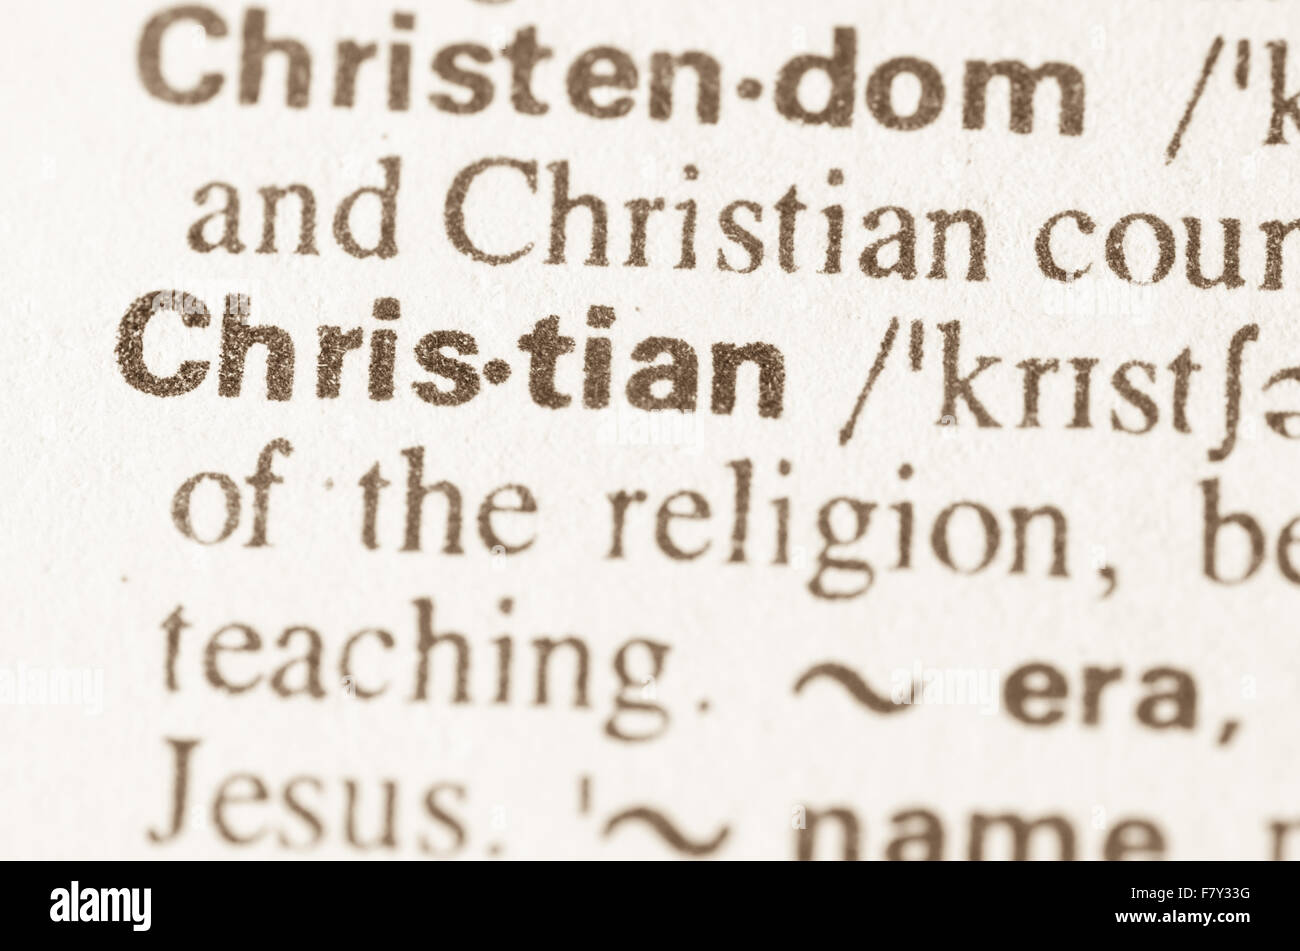 definition of word christian in dictionary stock photo: 90949588 - alamy